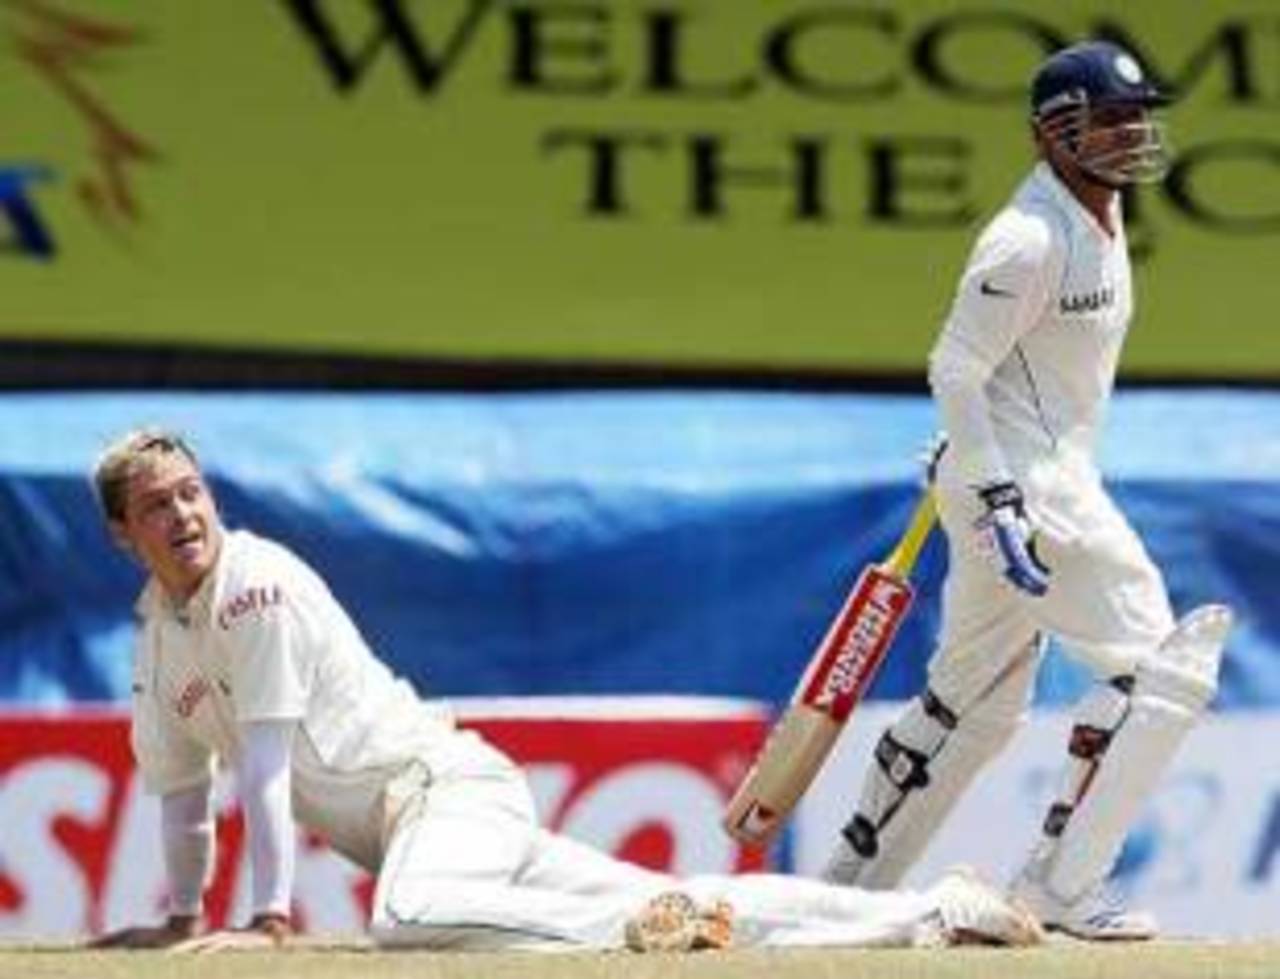 Paul Harris falls flat as Virender Sehwag marches on, India v South Africa, 1st Test, Chennai, 3rd day, March 28, 2008 